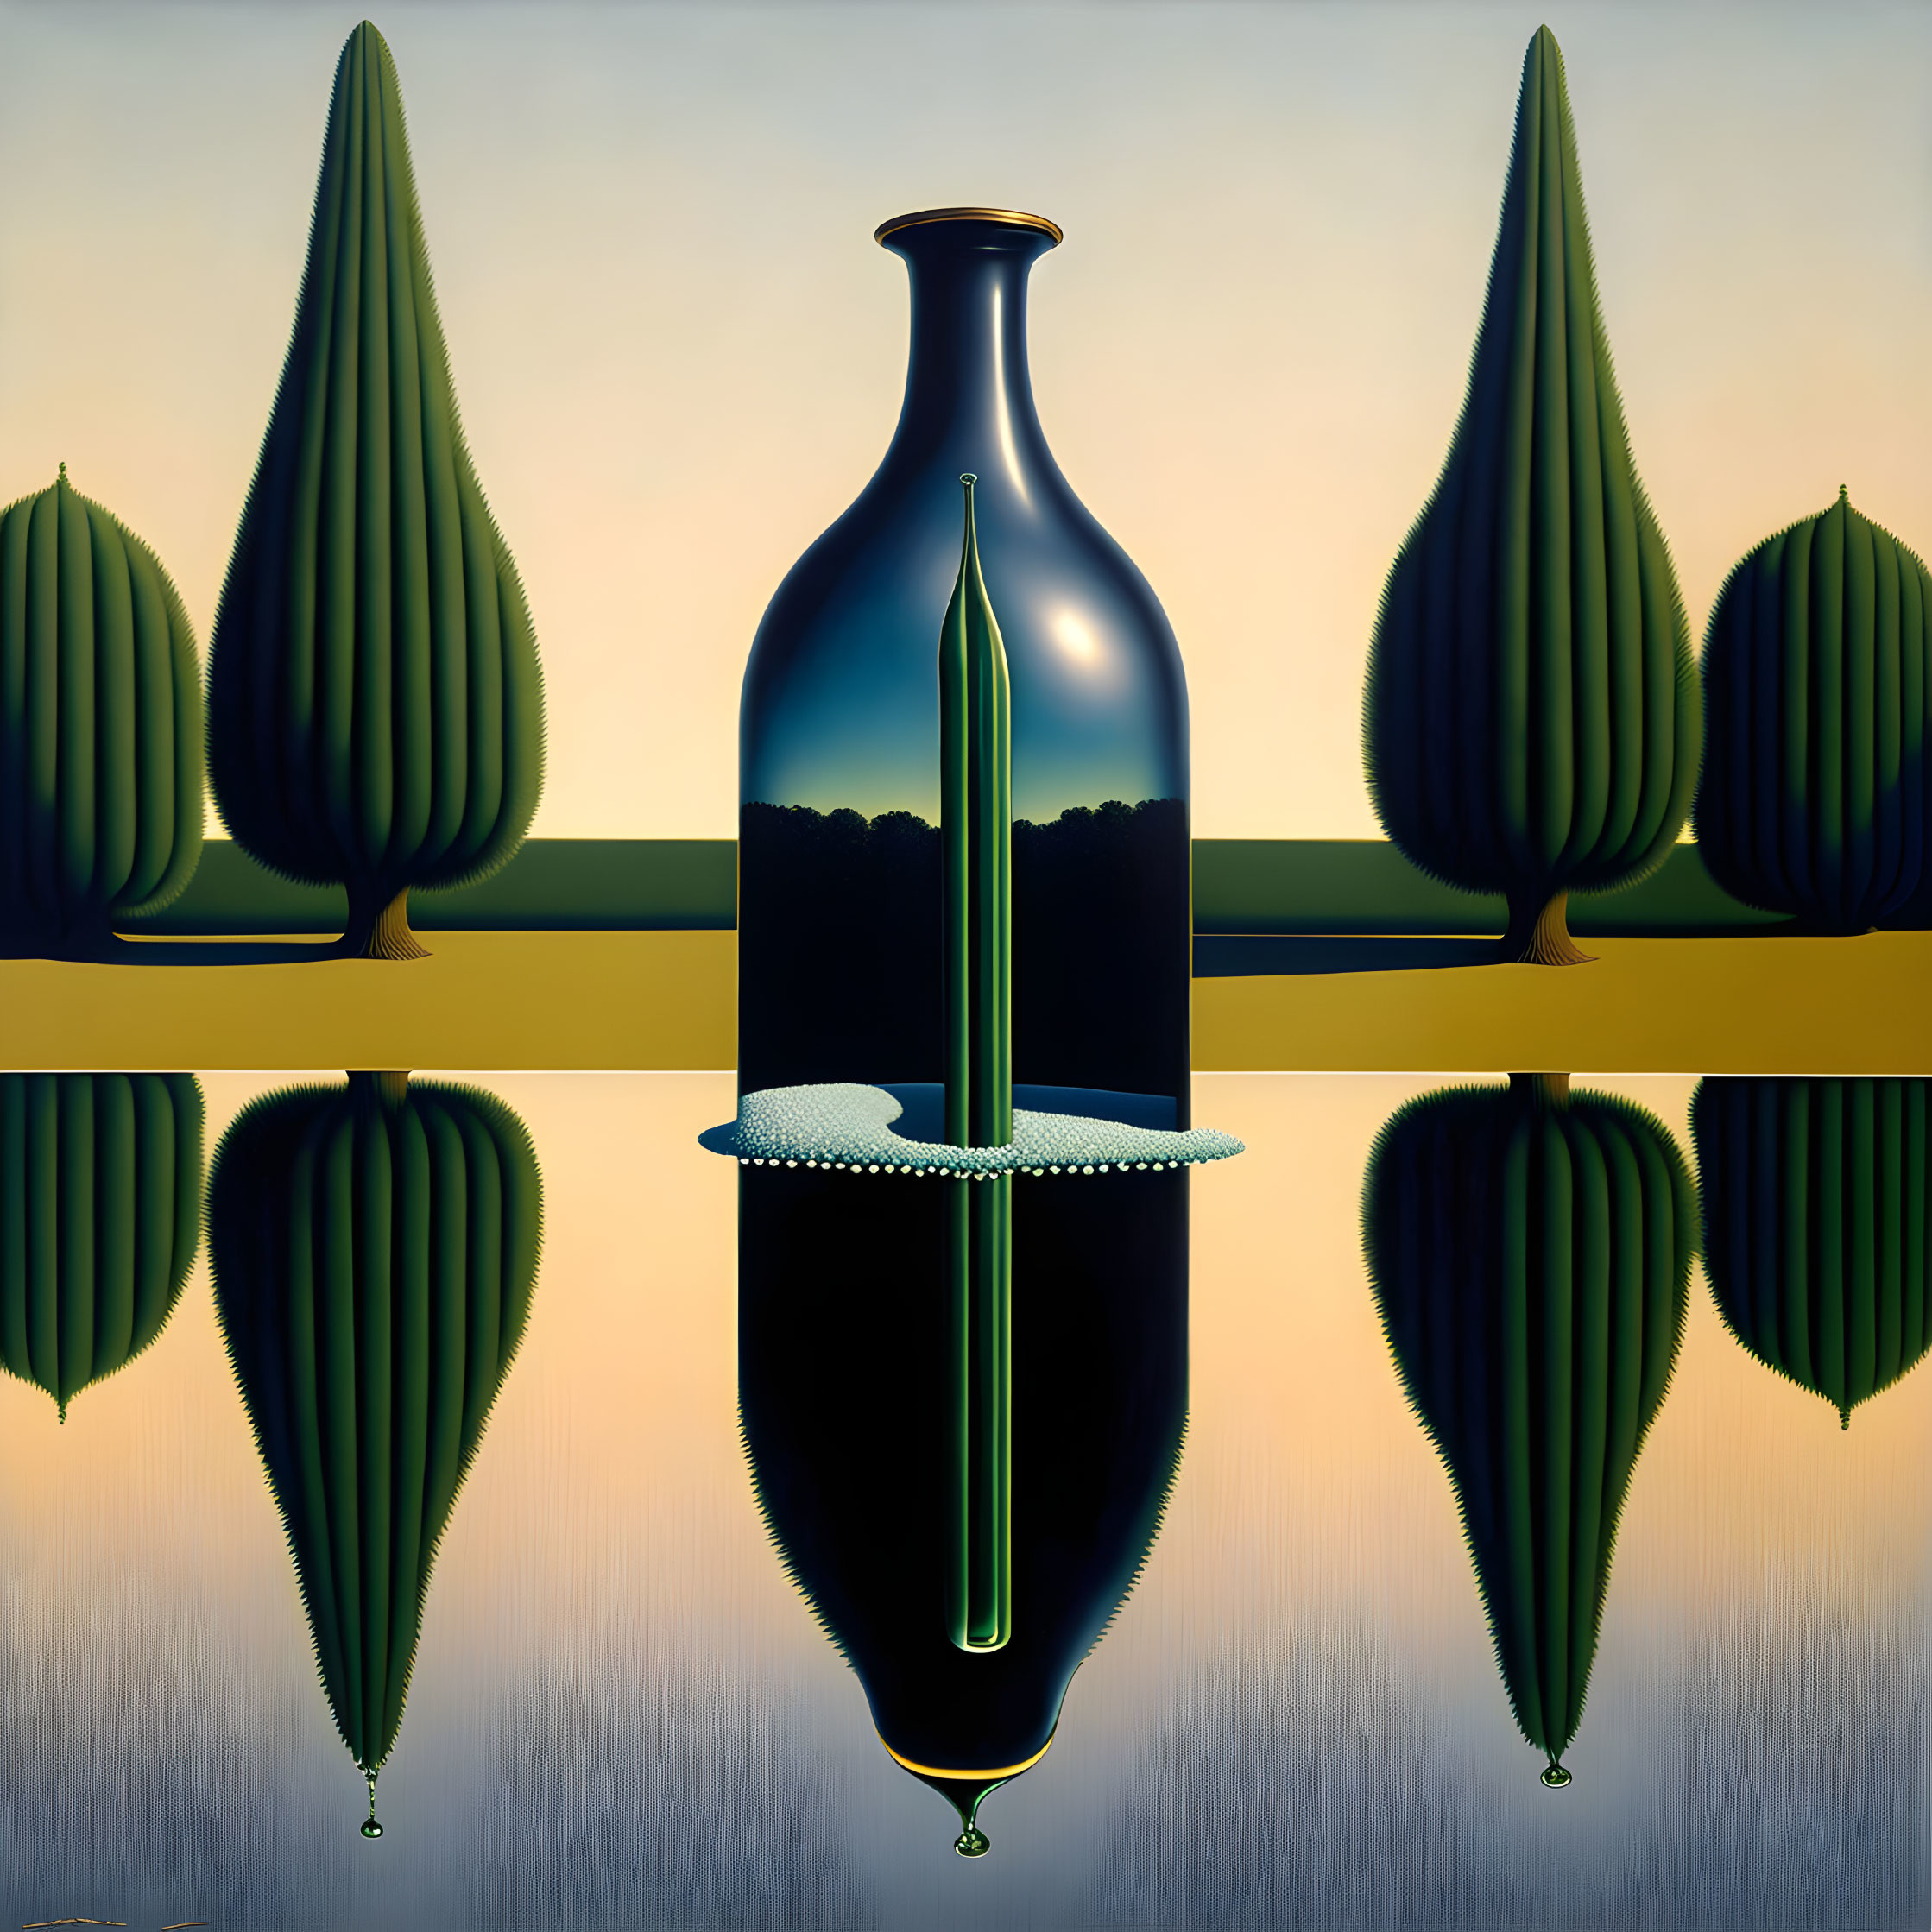 Symmetrical surreal painting of reflective vase and trees in twilight colors